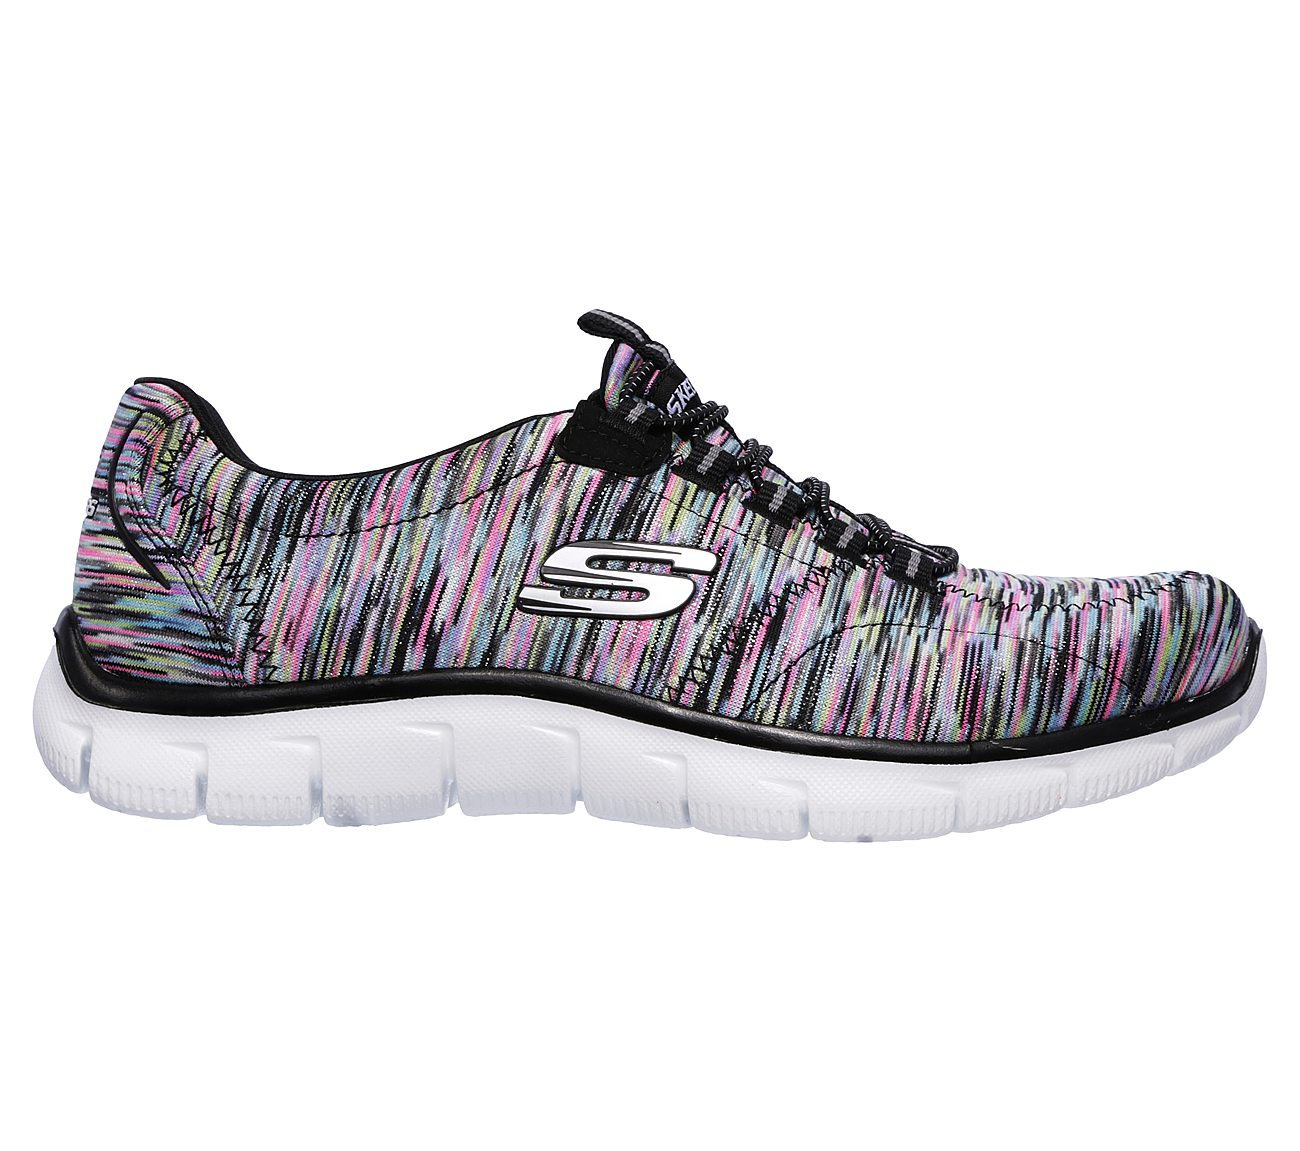 Skechers Women Relaxed Fit: Empire - Game On Black/Multi